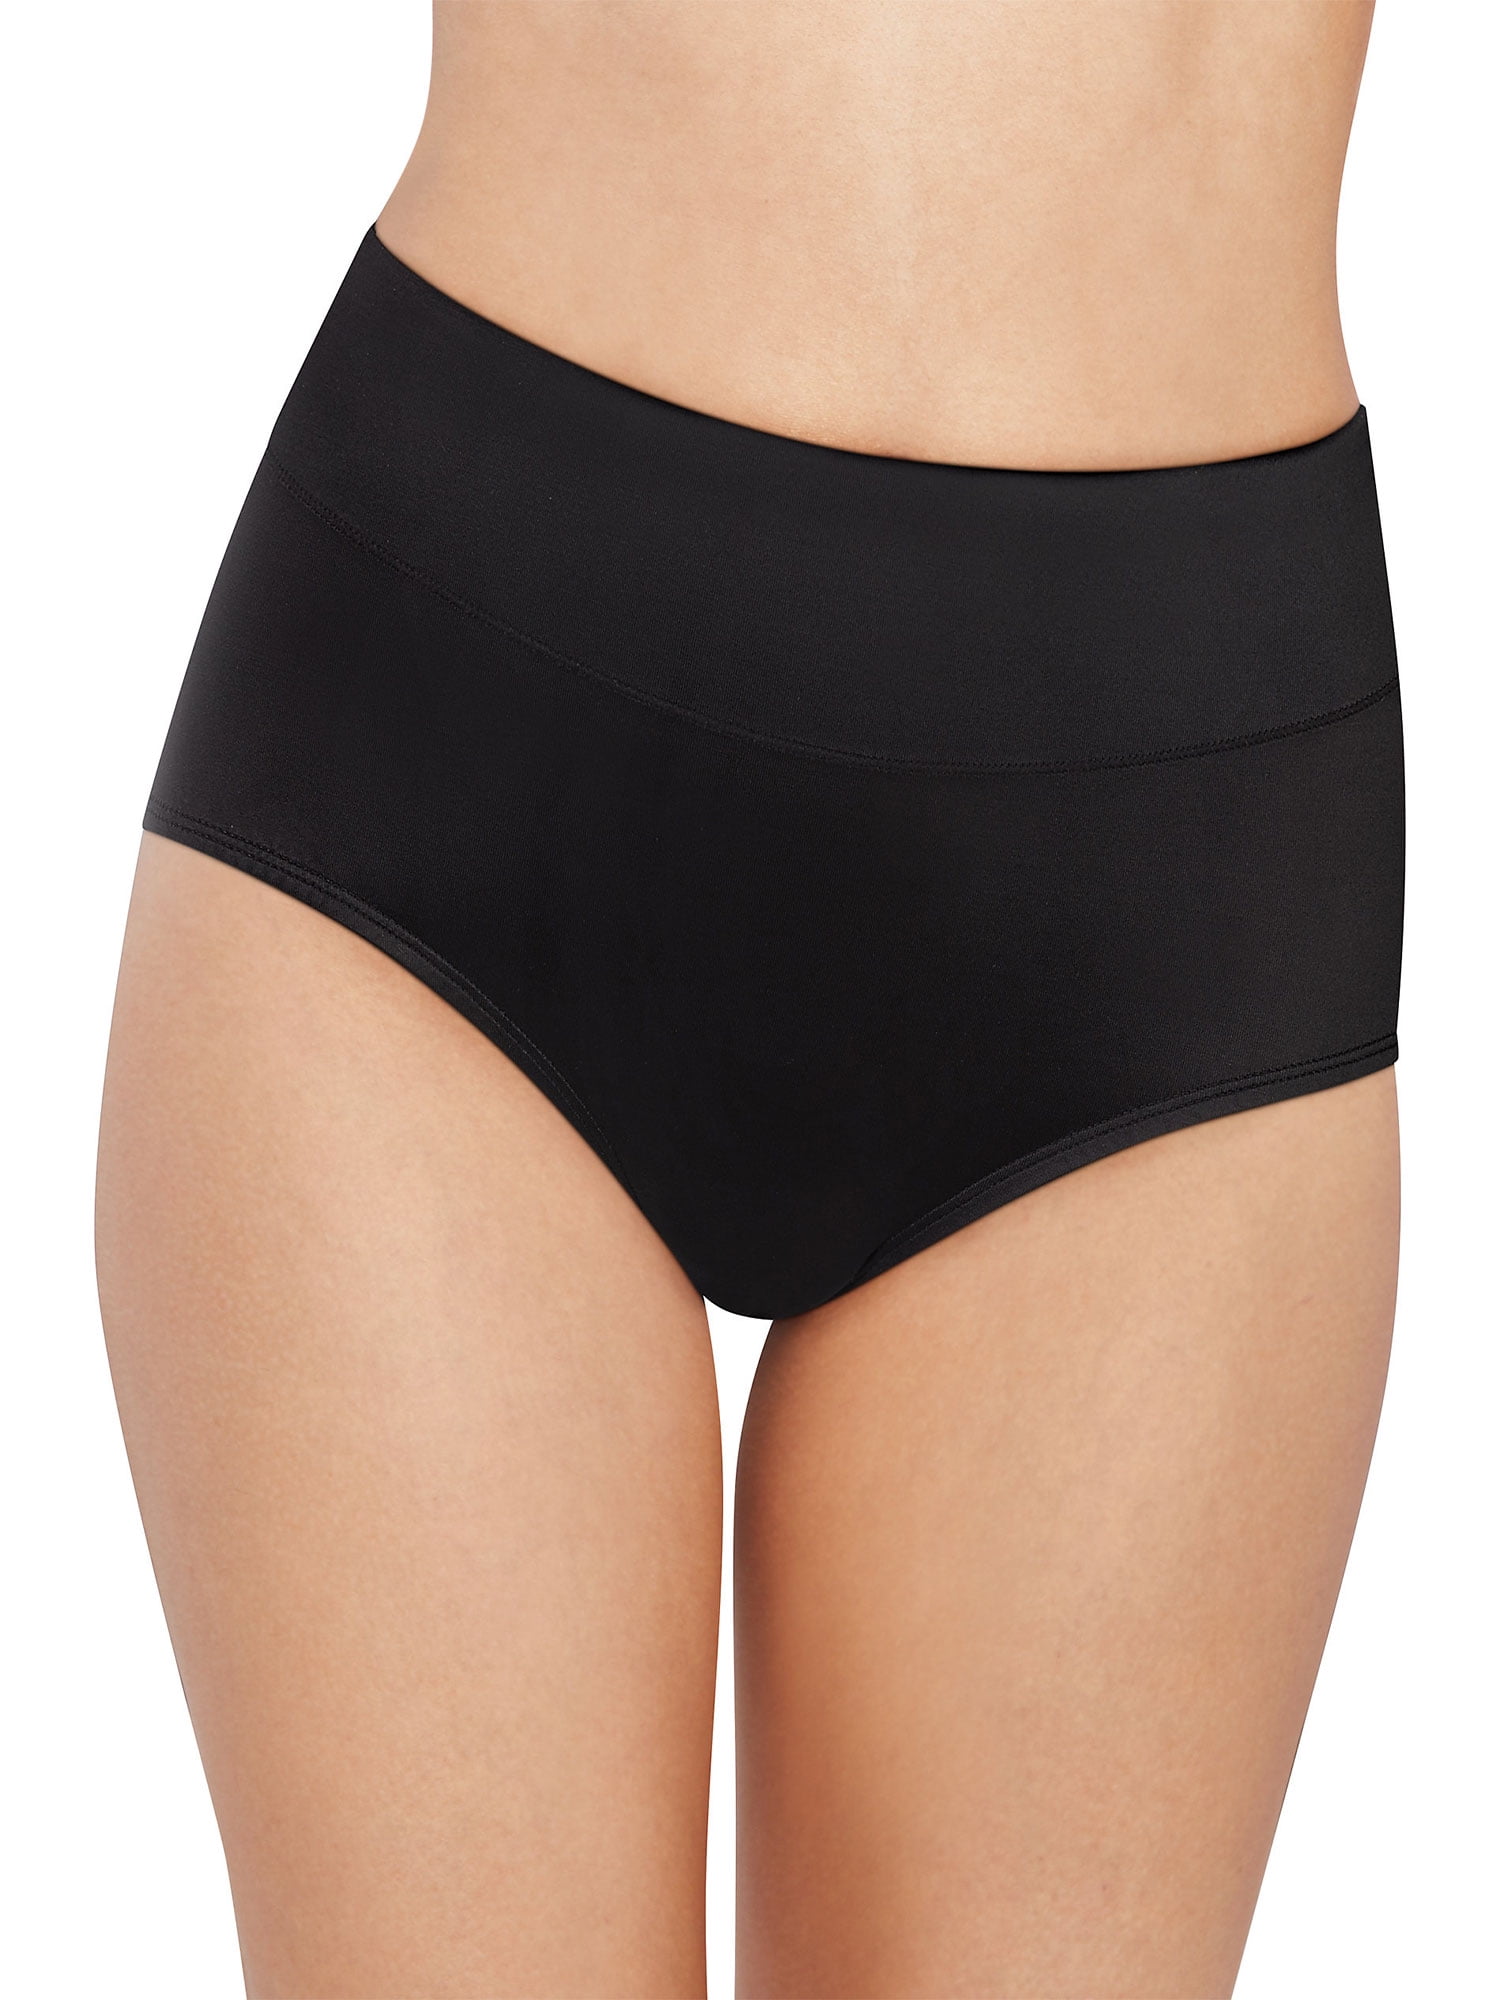 Bali Passion For Comfort Brief Panty Black 8 Women's